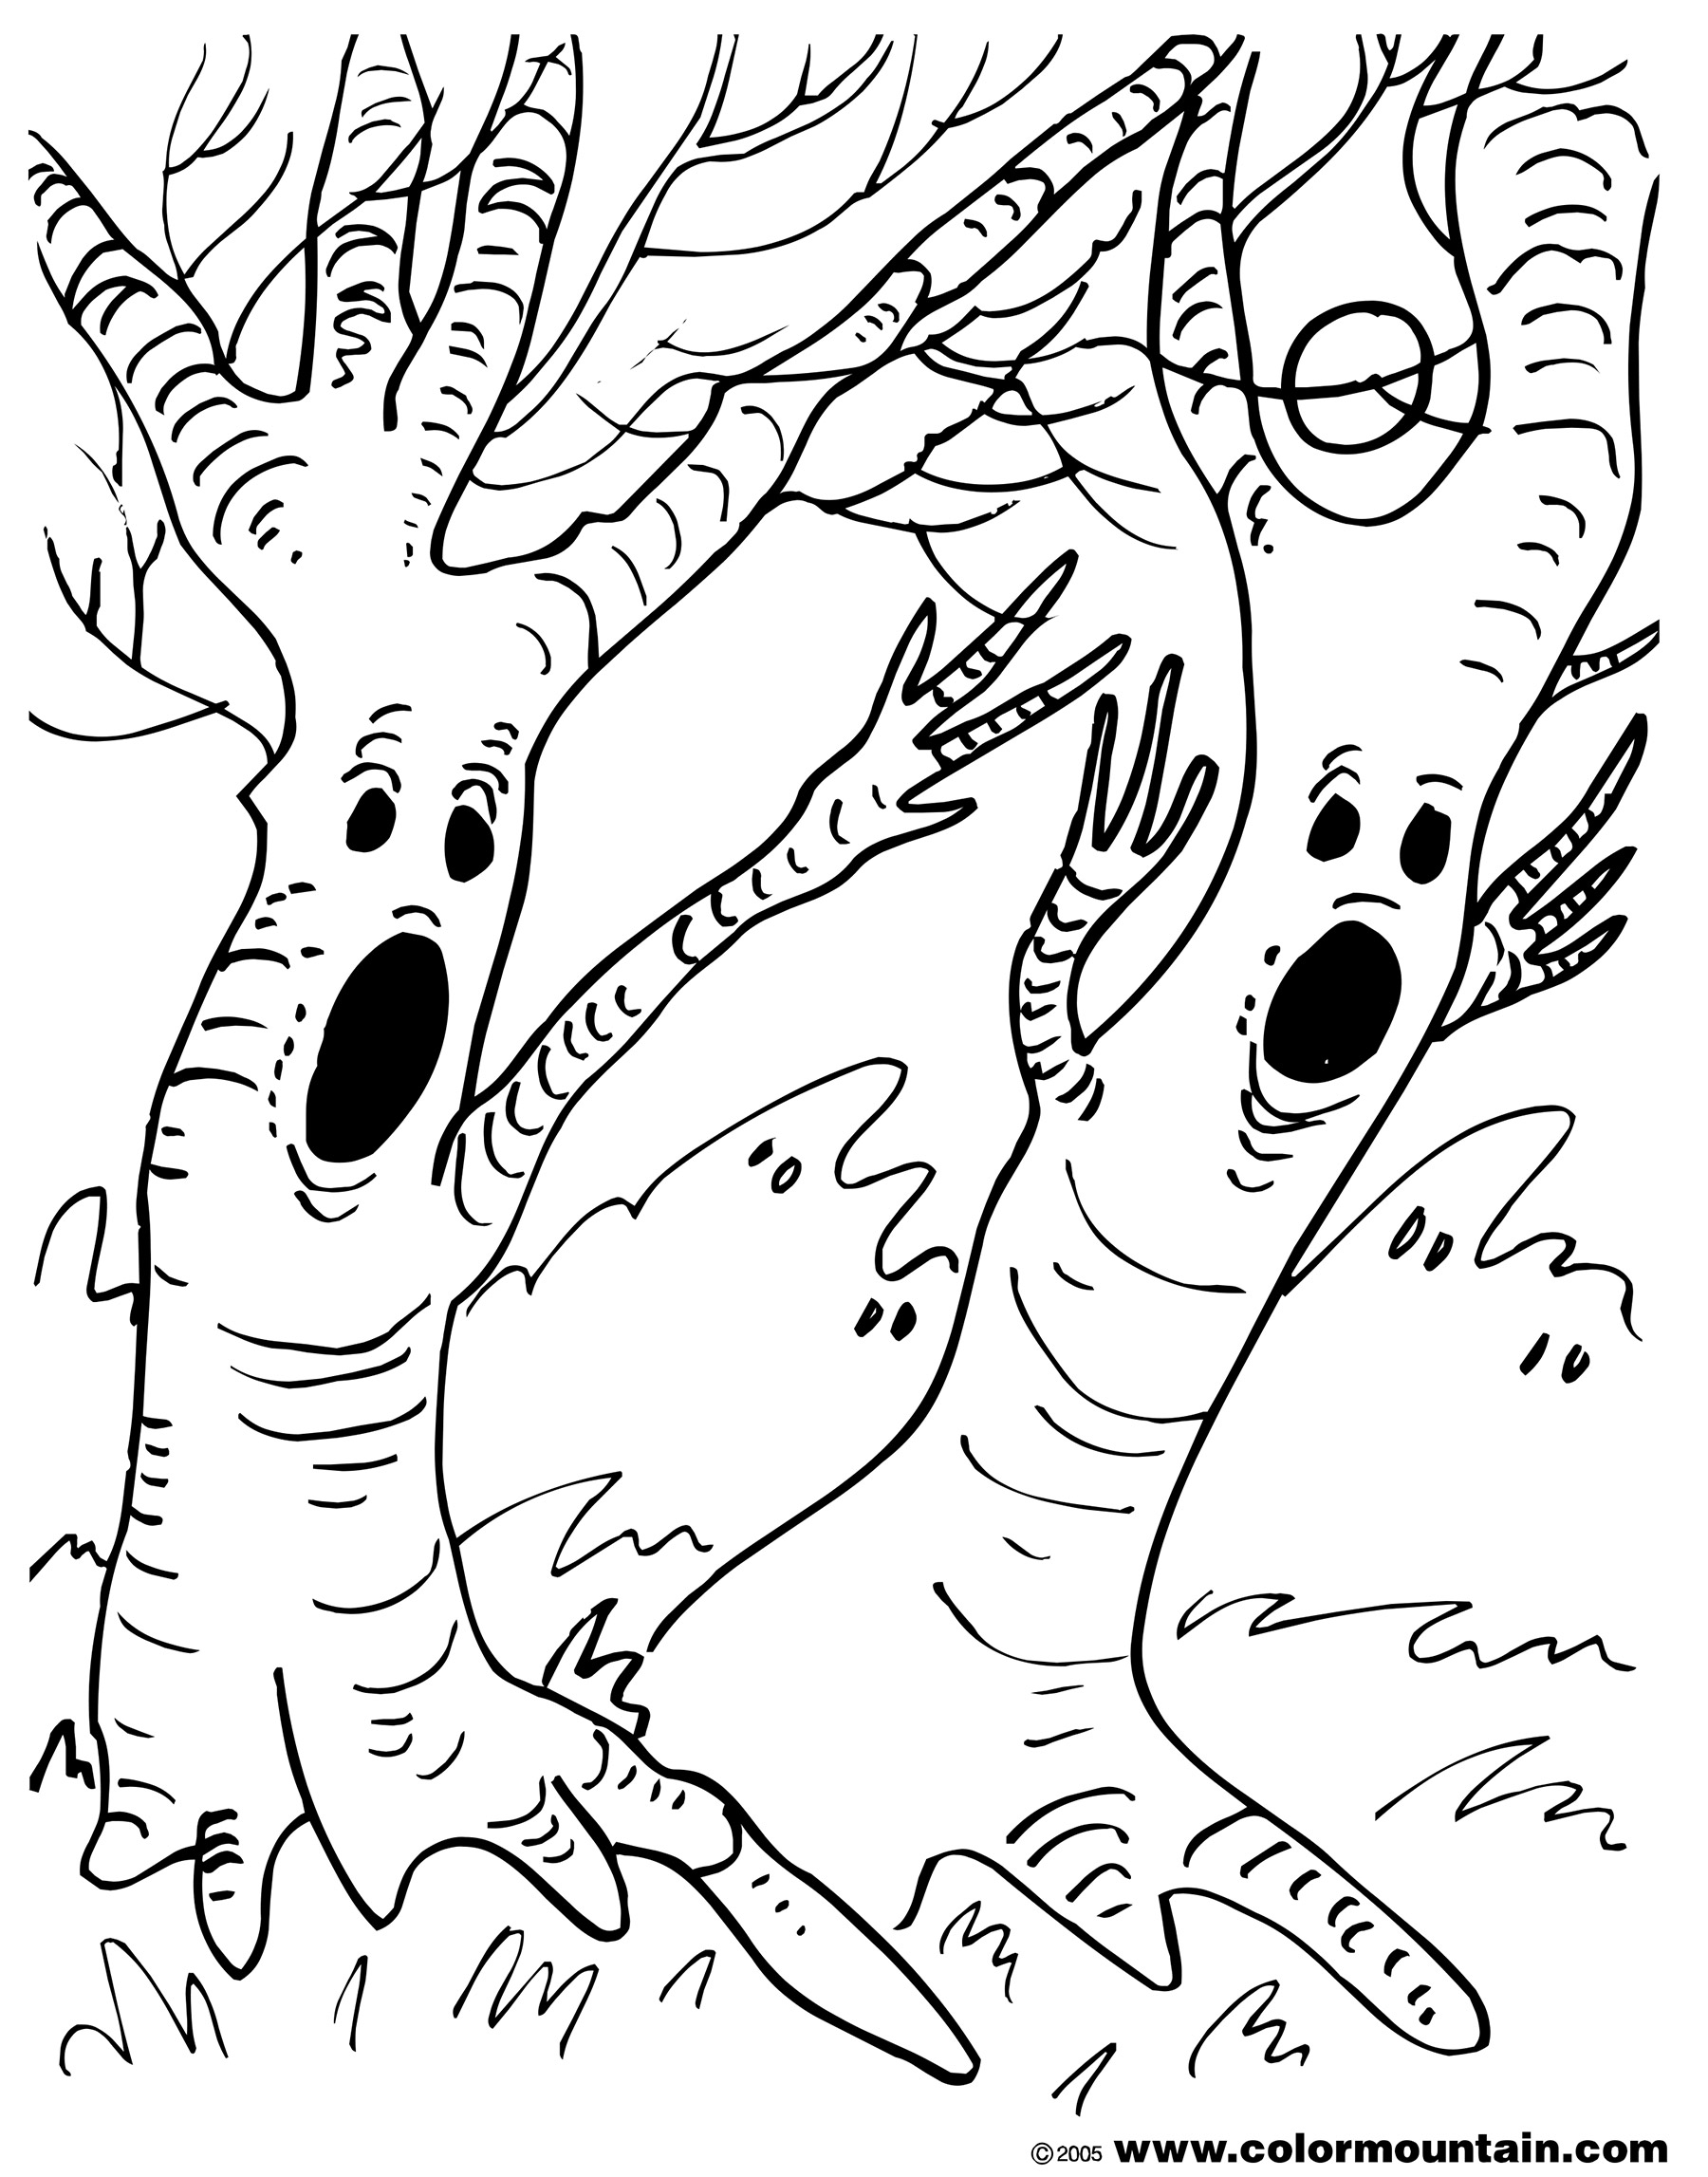 Spooky Tree Coloring Page - Create A Printout Or Activity